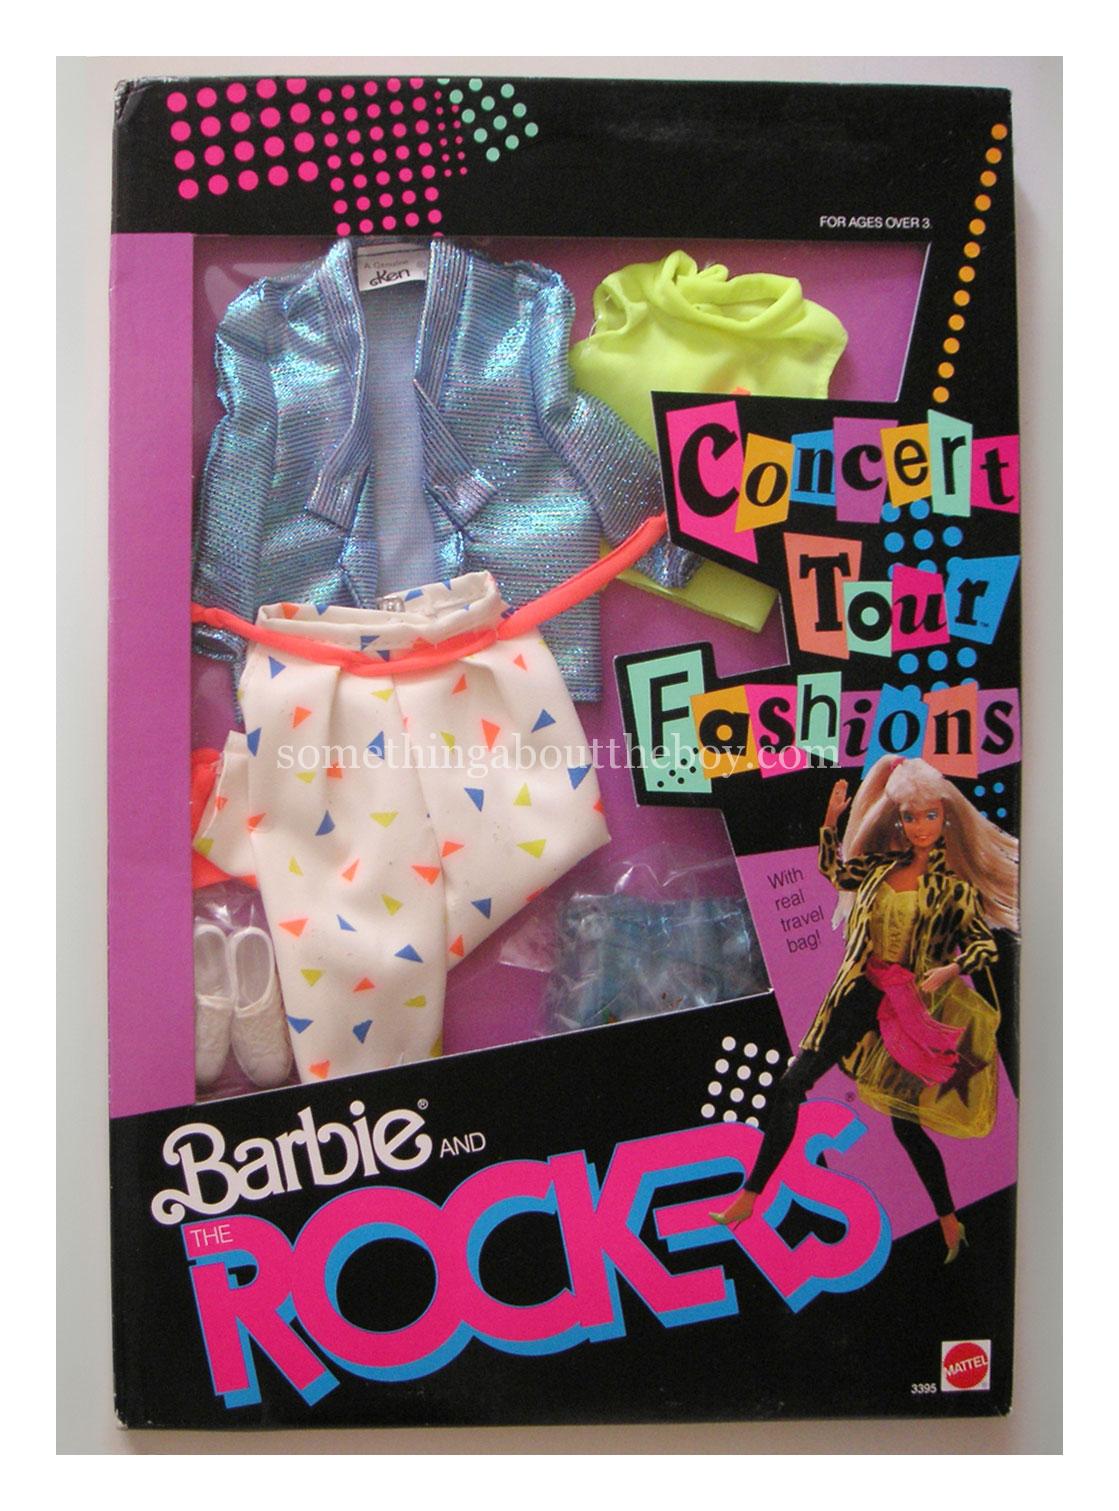 1987 #3395 Concert Tour Fashions in original packaging